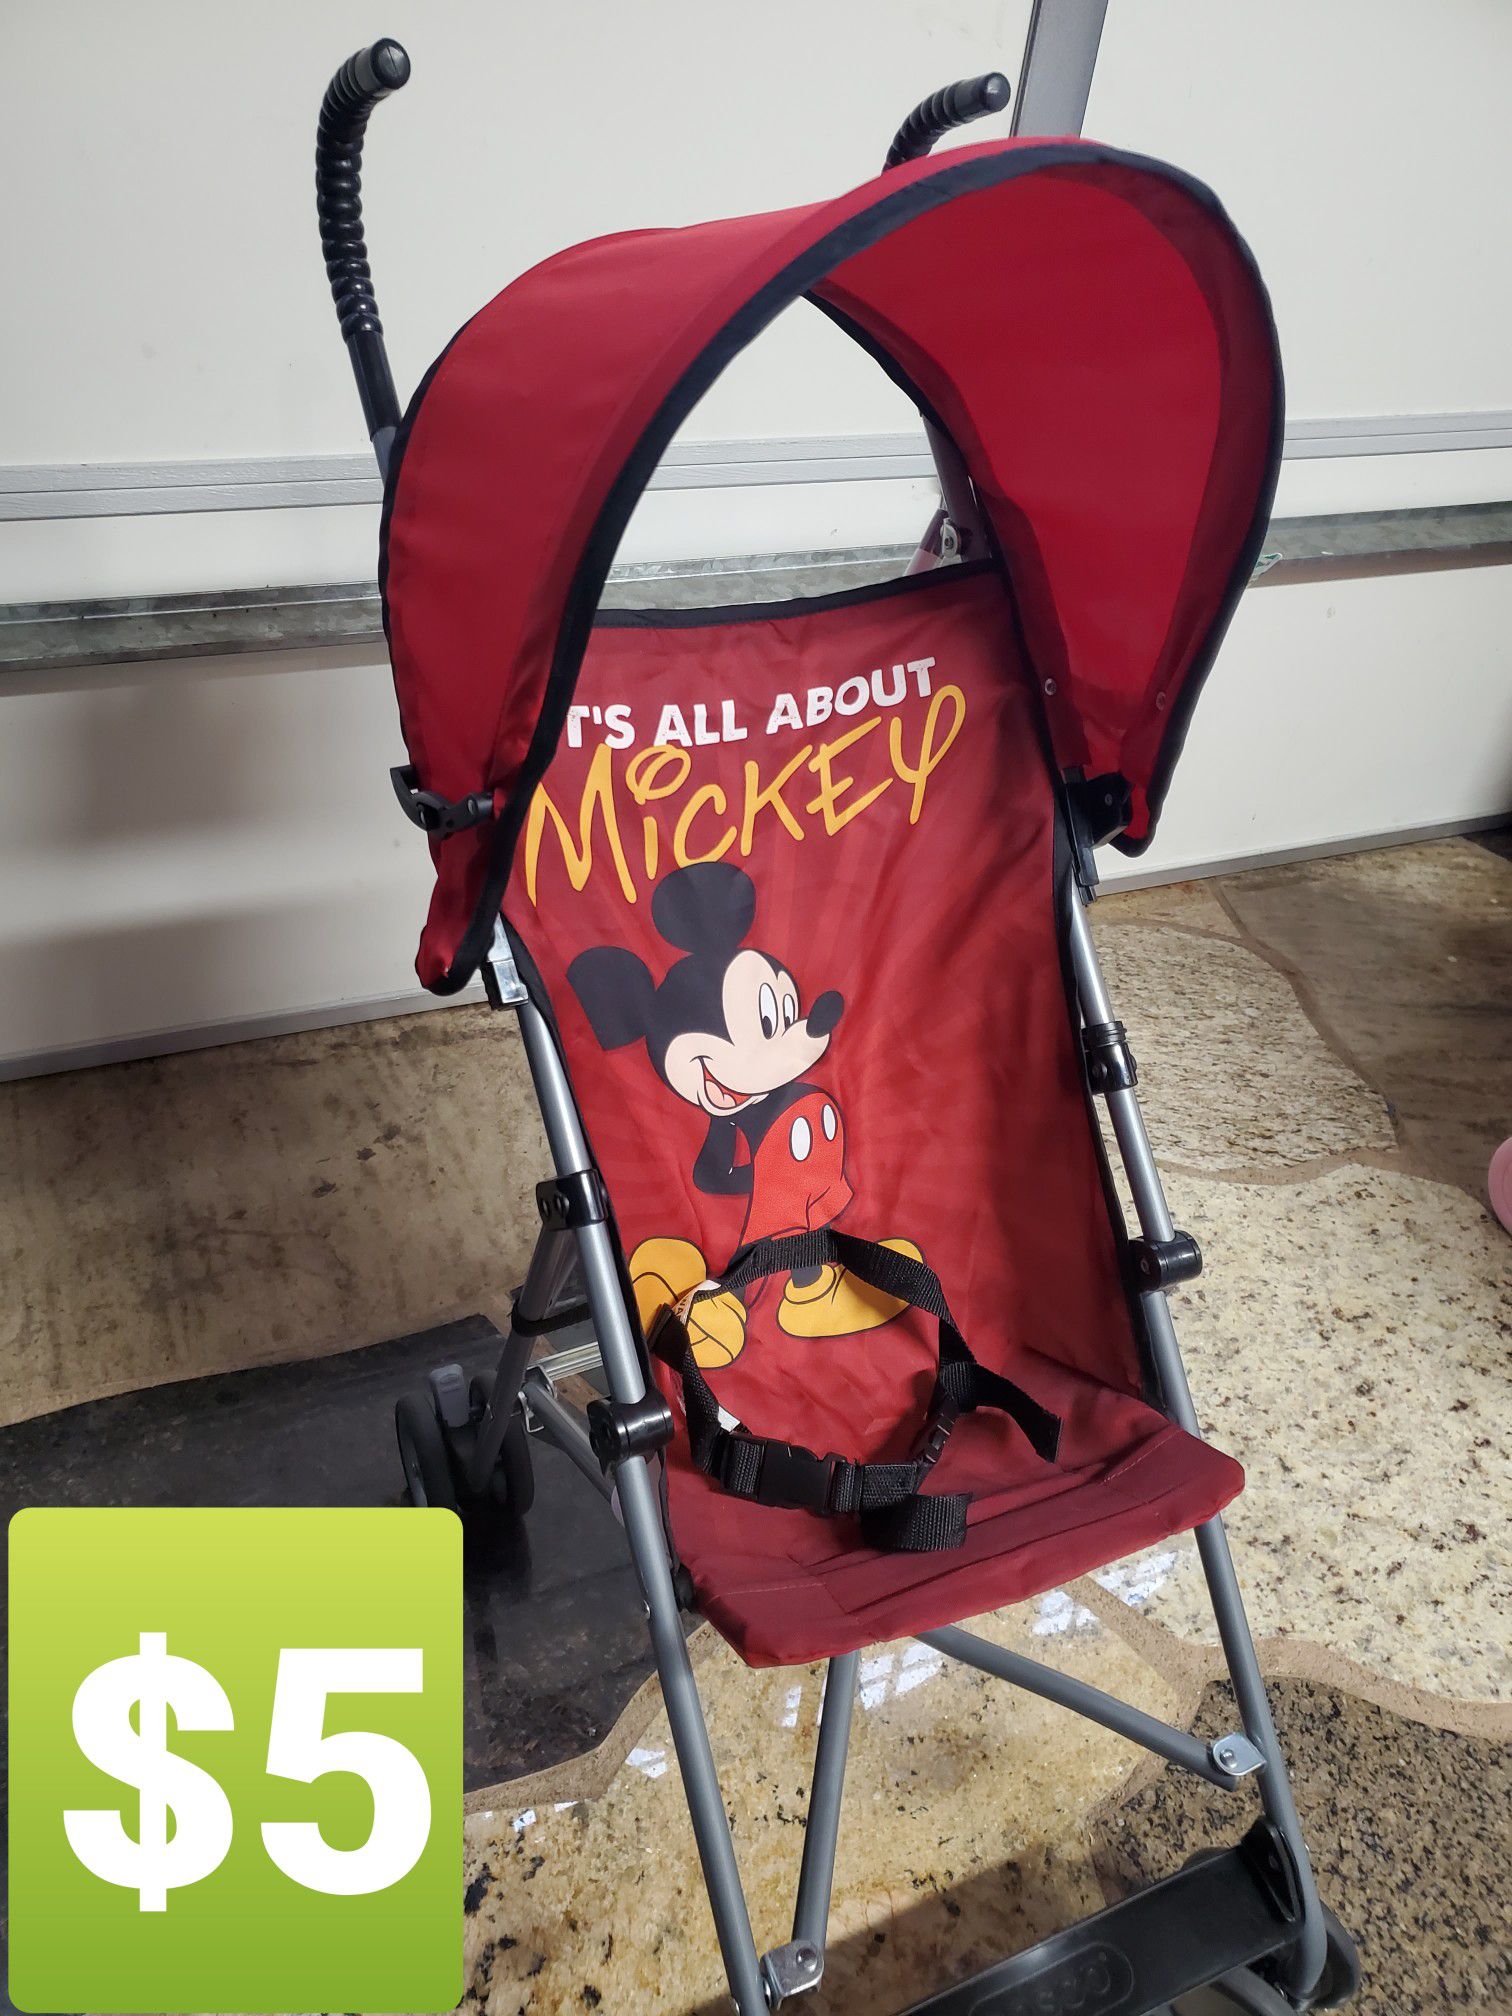 MICKEY MOUSE STROLLER $5